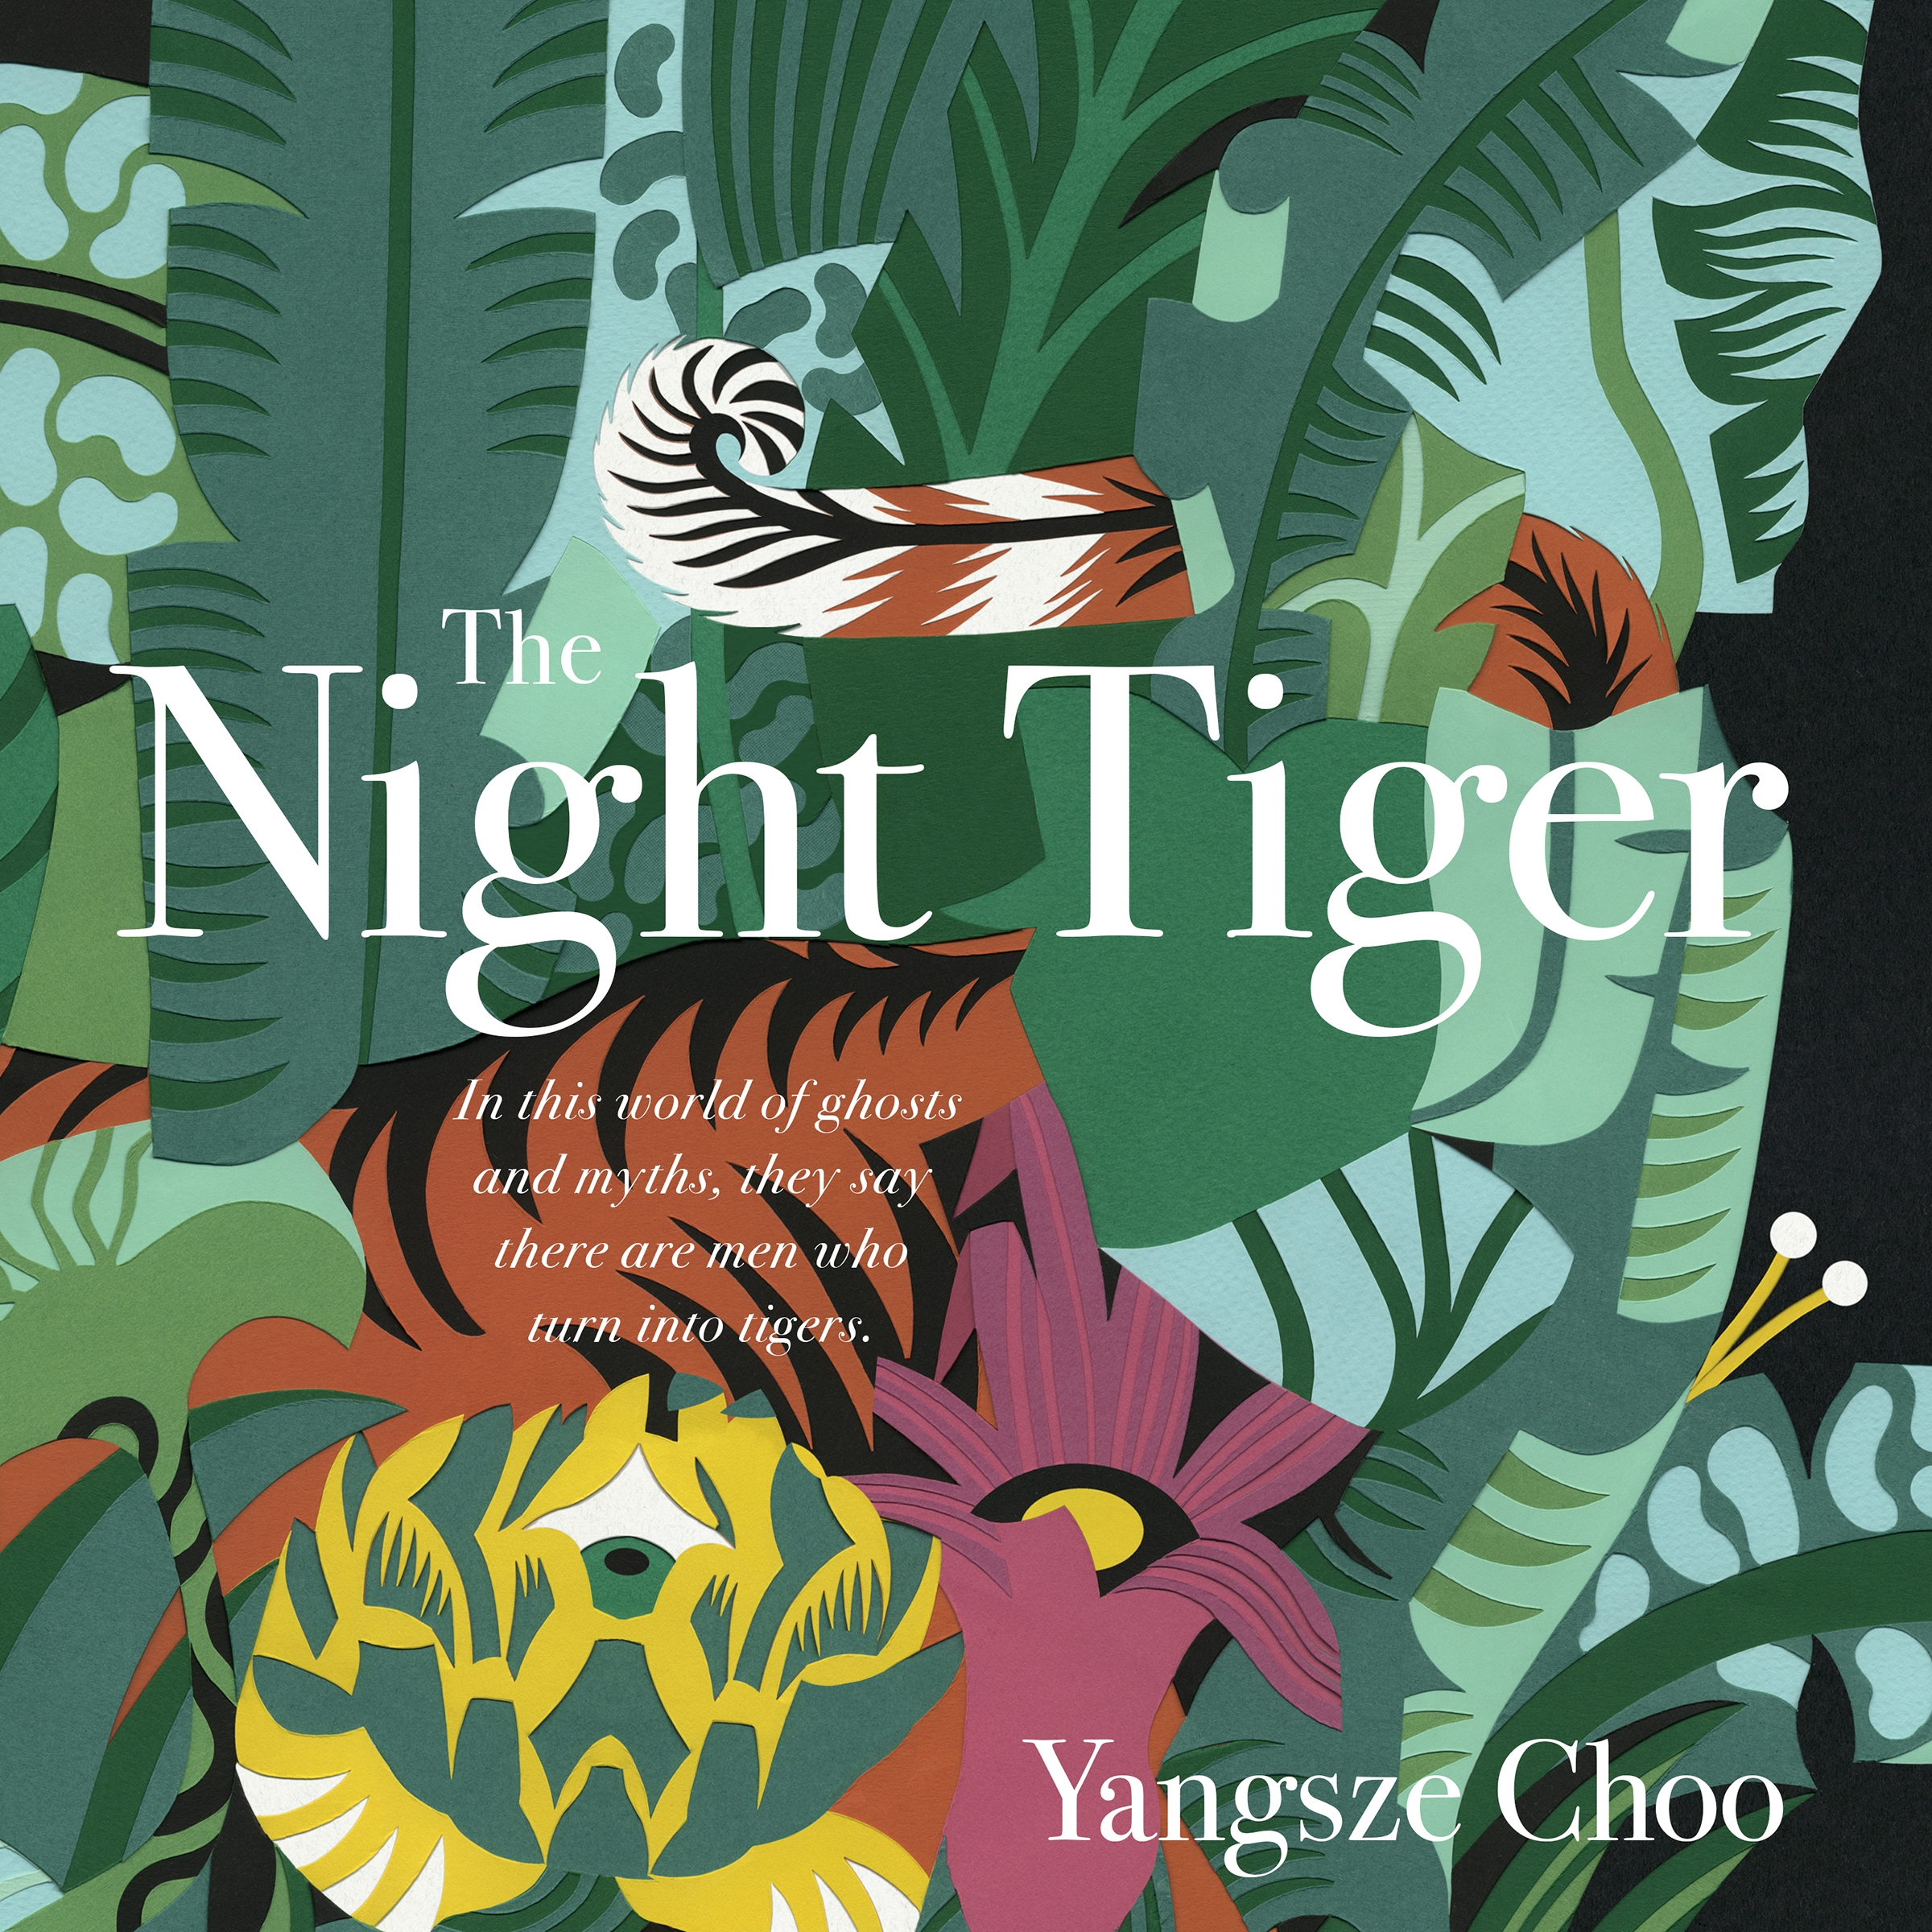 the night tiger book